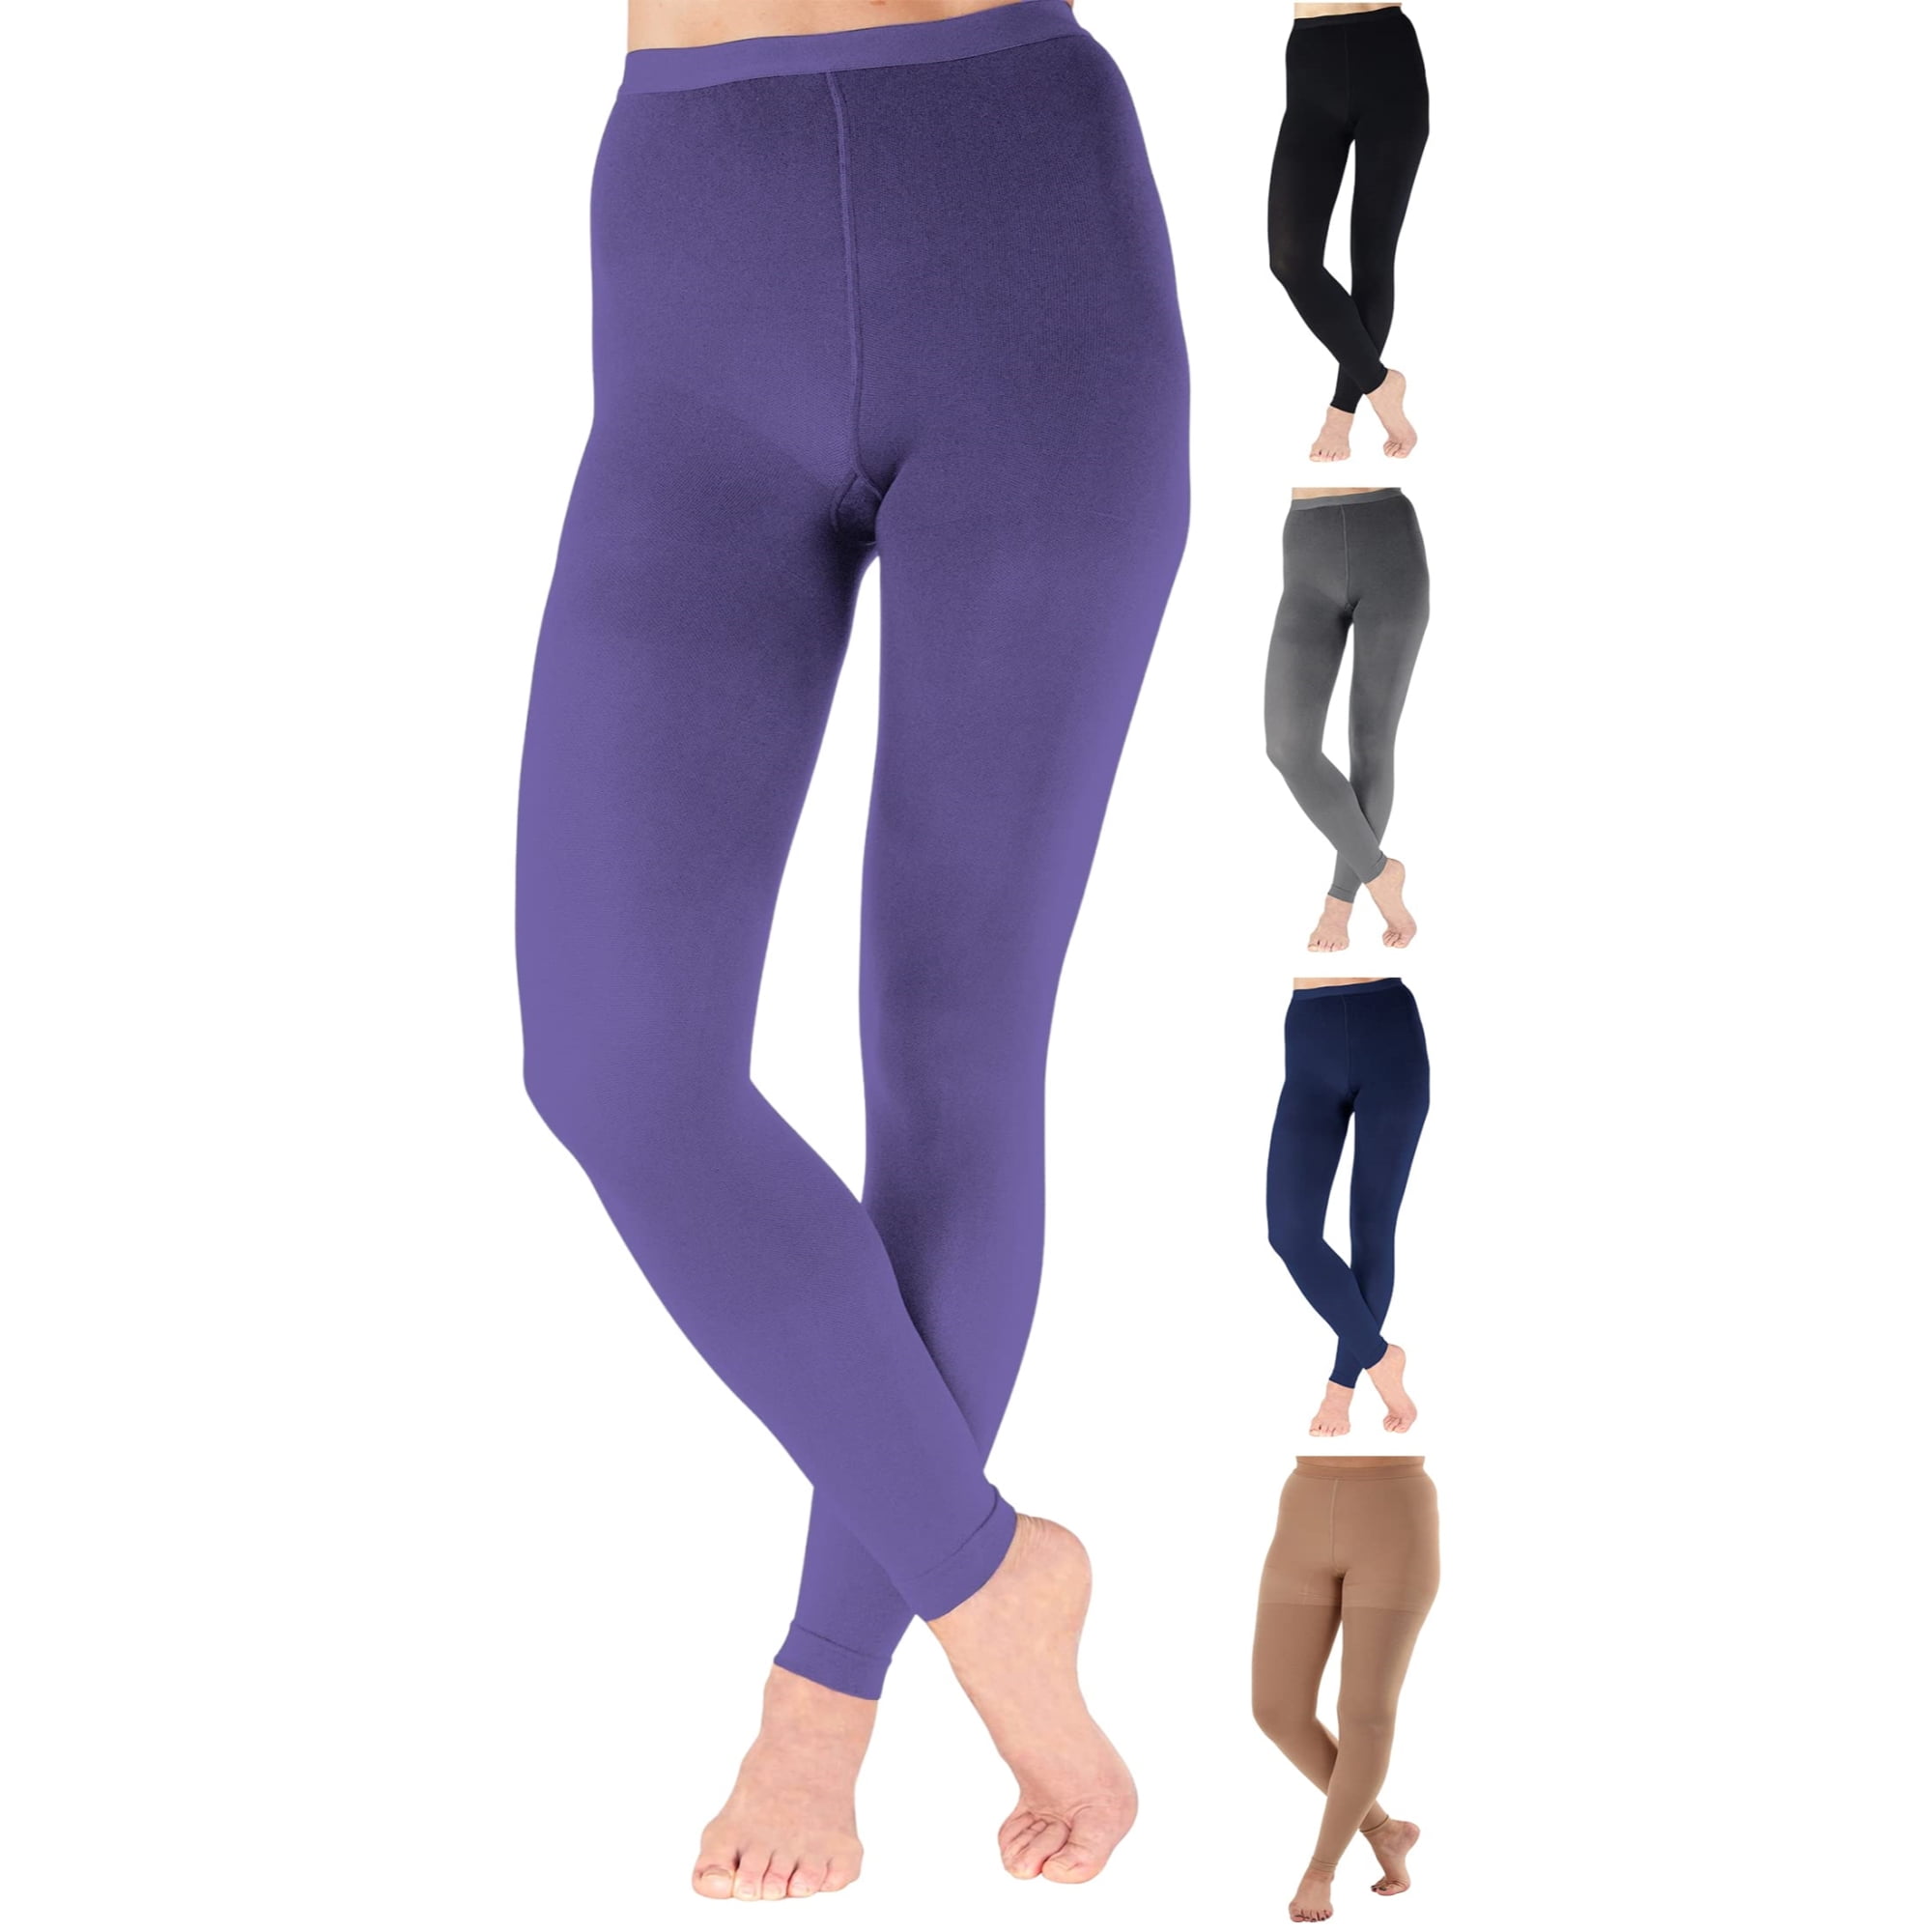 Footless Compression Tights for Women Circulation 20-30mmHg